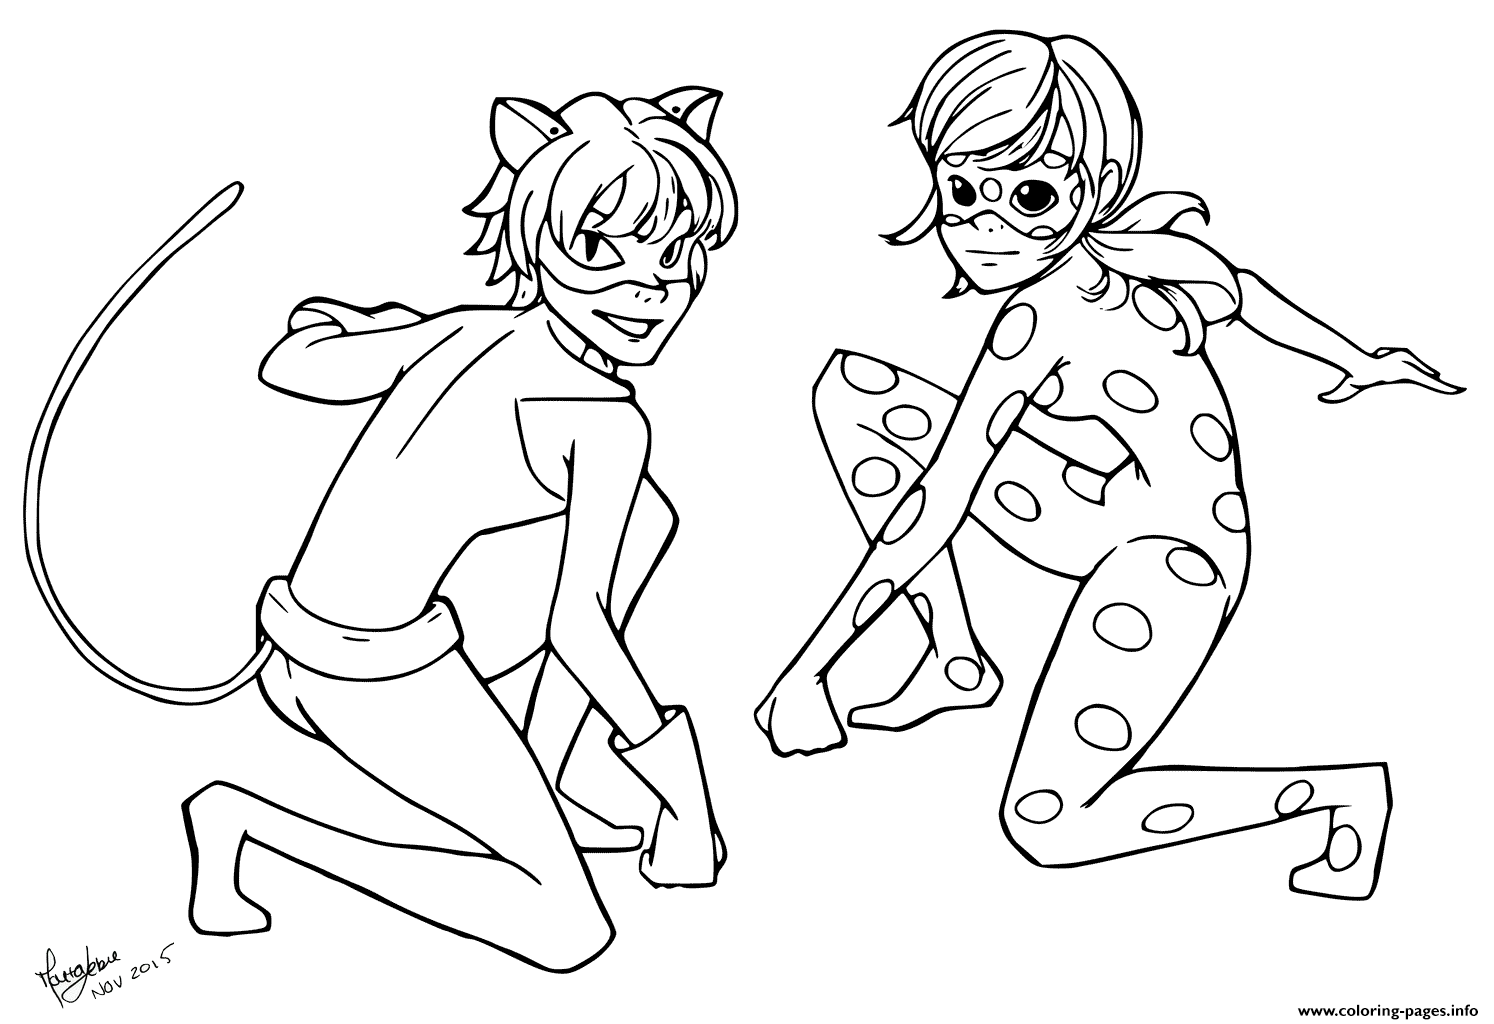 ladybug-and-cat-noir-coloring-pages-coloring-home